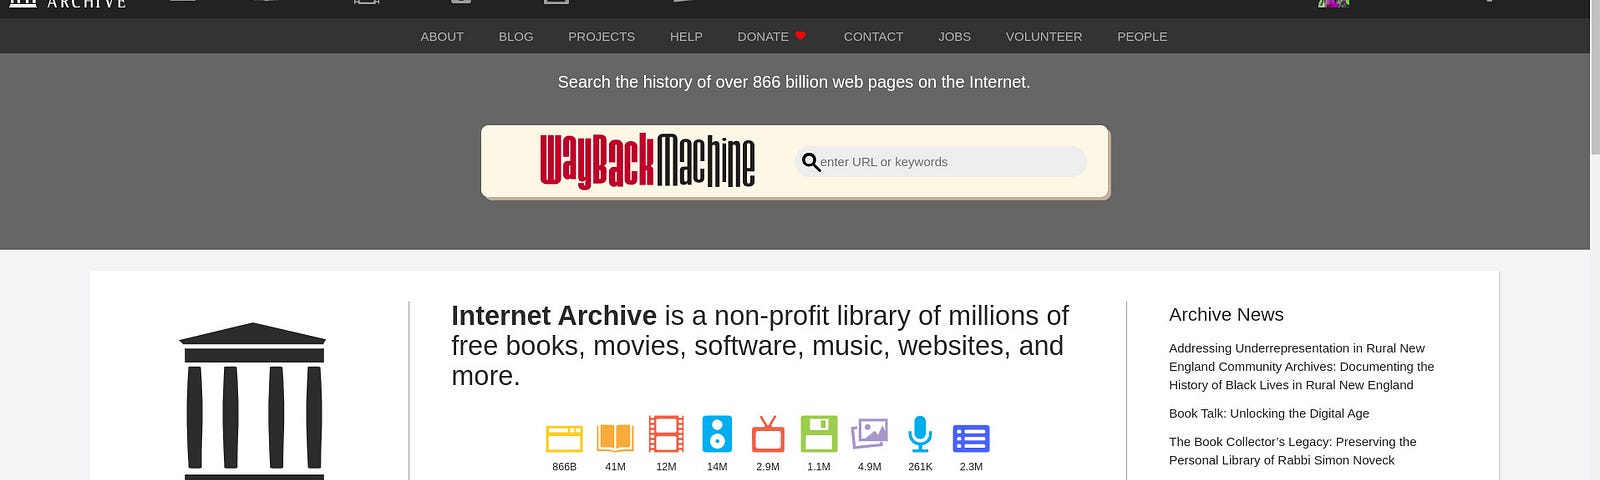 Displayed on the screen is the homepage of the Internet Archive with a focus on the Wayback Machine search bar. Below the search bar, an explanatory text mentions that Internet Archive is a non-profit library of books, movies, software, music, websites, and more, along with icons representing these media types.